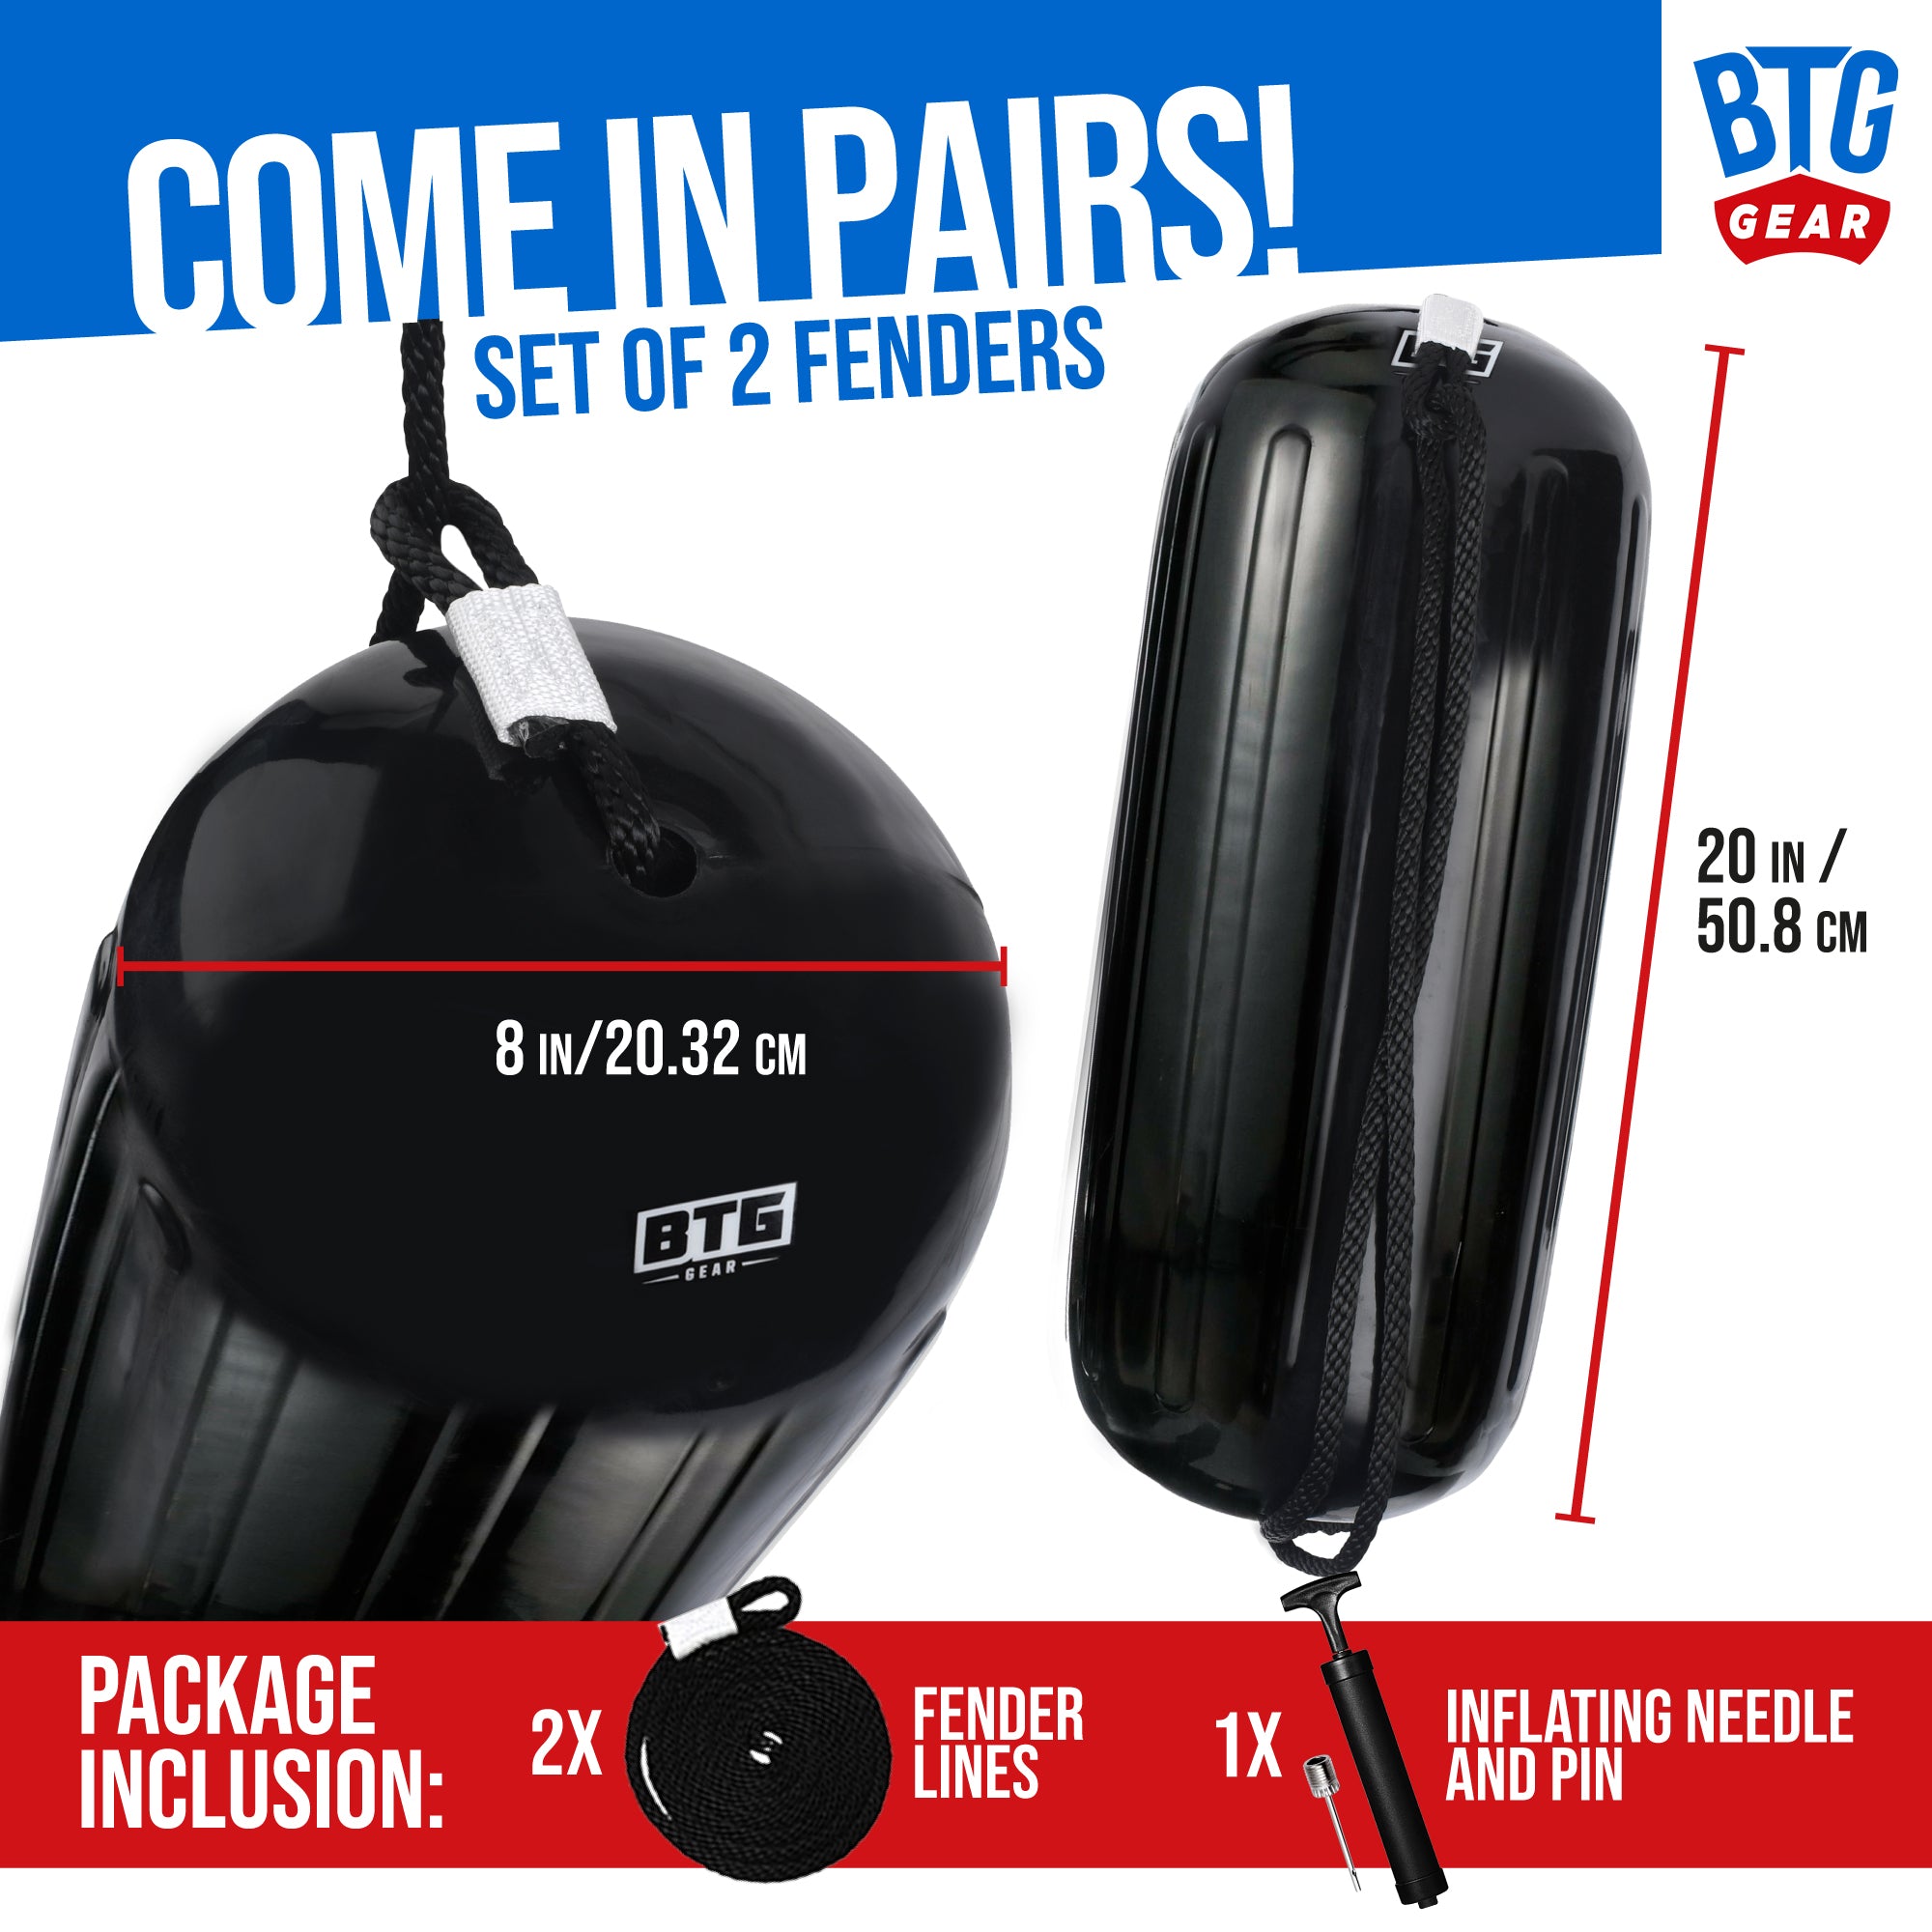 BTG GEAR Pair/Set of 2 Inflatable Center Hole in Middle Boat Fenders in Black, 8